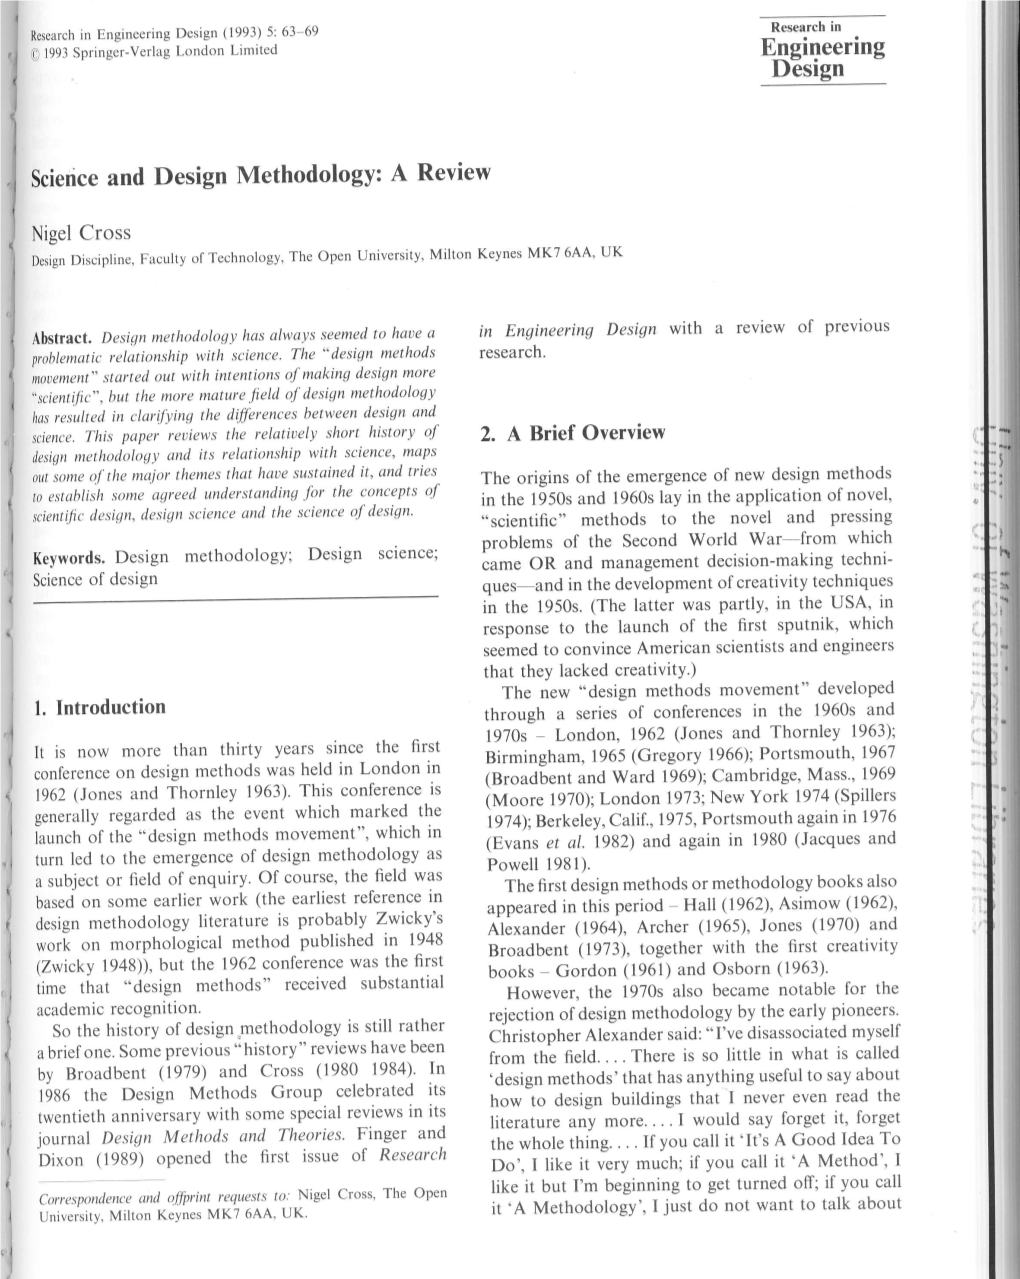 Science and Design Methodology: a Review